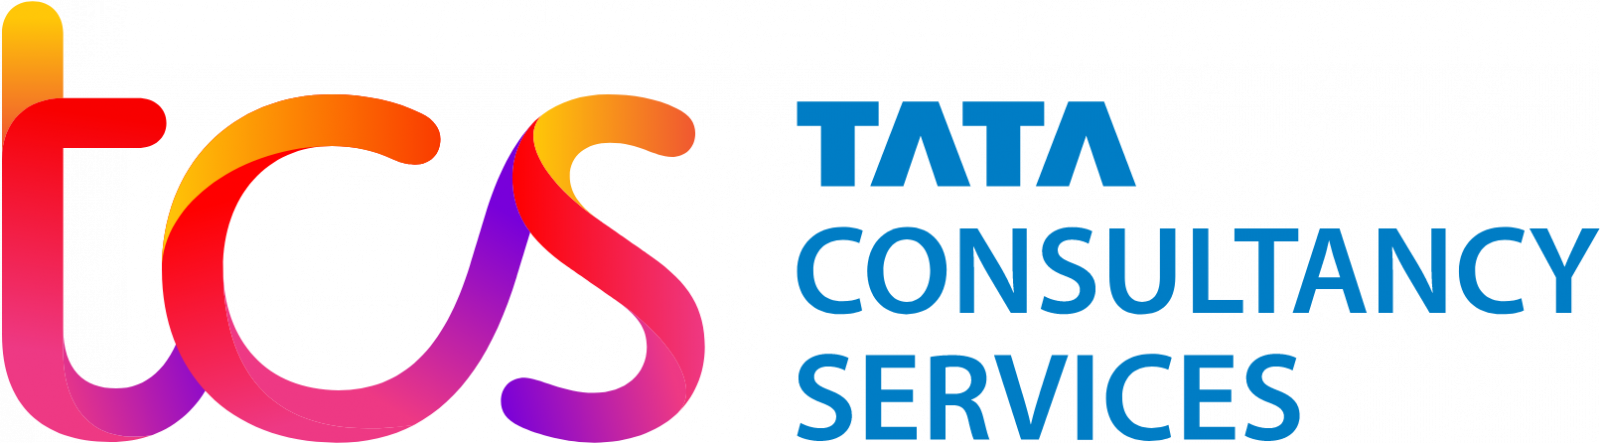 TATA Consultancy Services (TCS) it companies in Noida